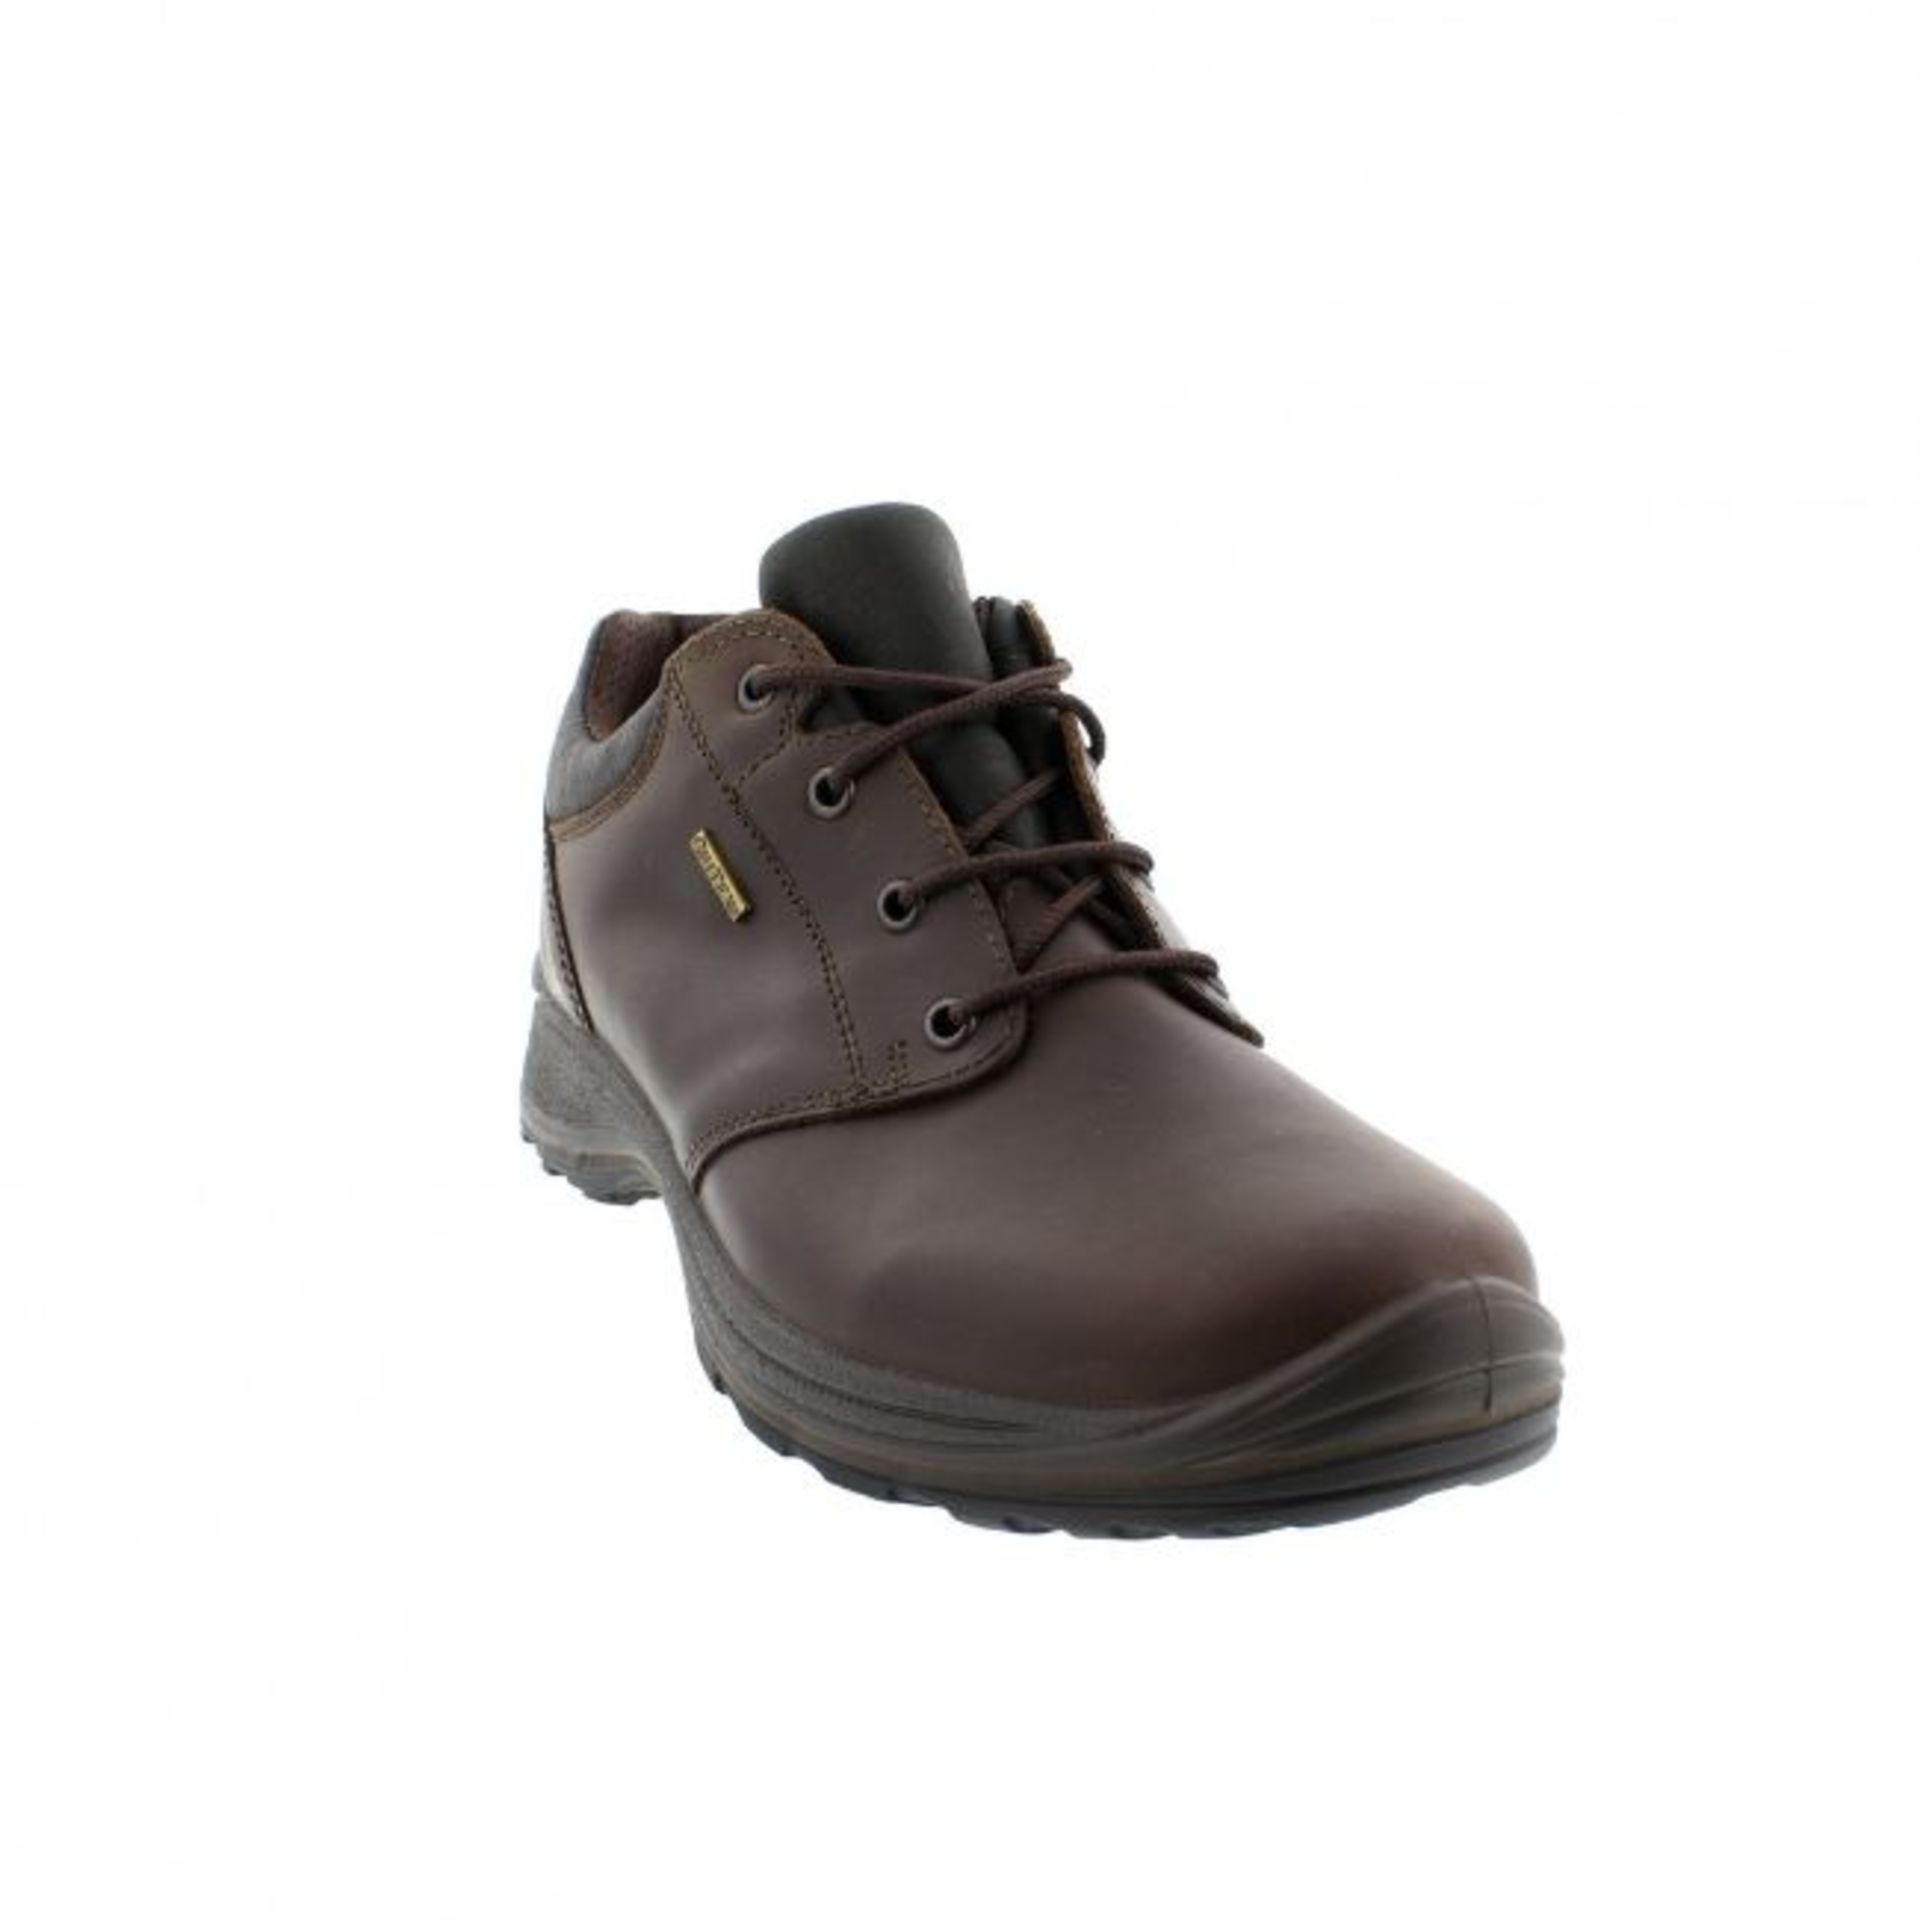 1 x Pair of Men's Grisport Brown Leather GriTex Shoes - Rogerson Footwear - Brand New and Boxed - - Image 6 of 8